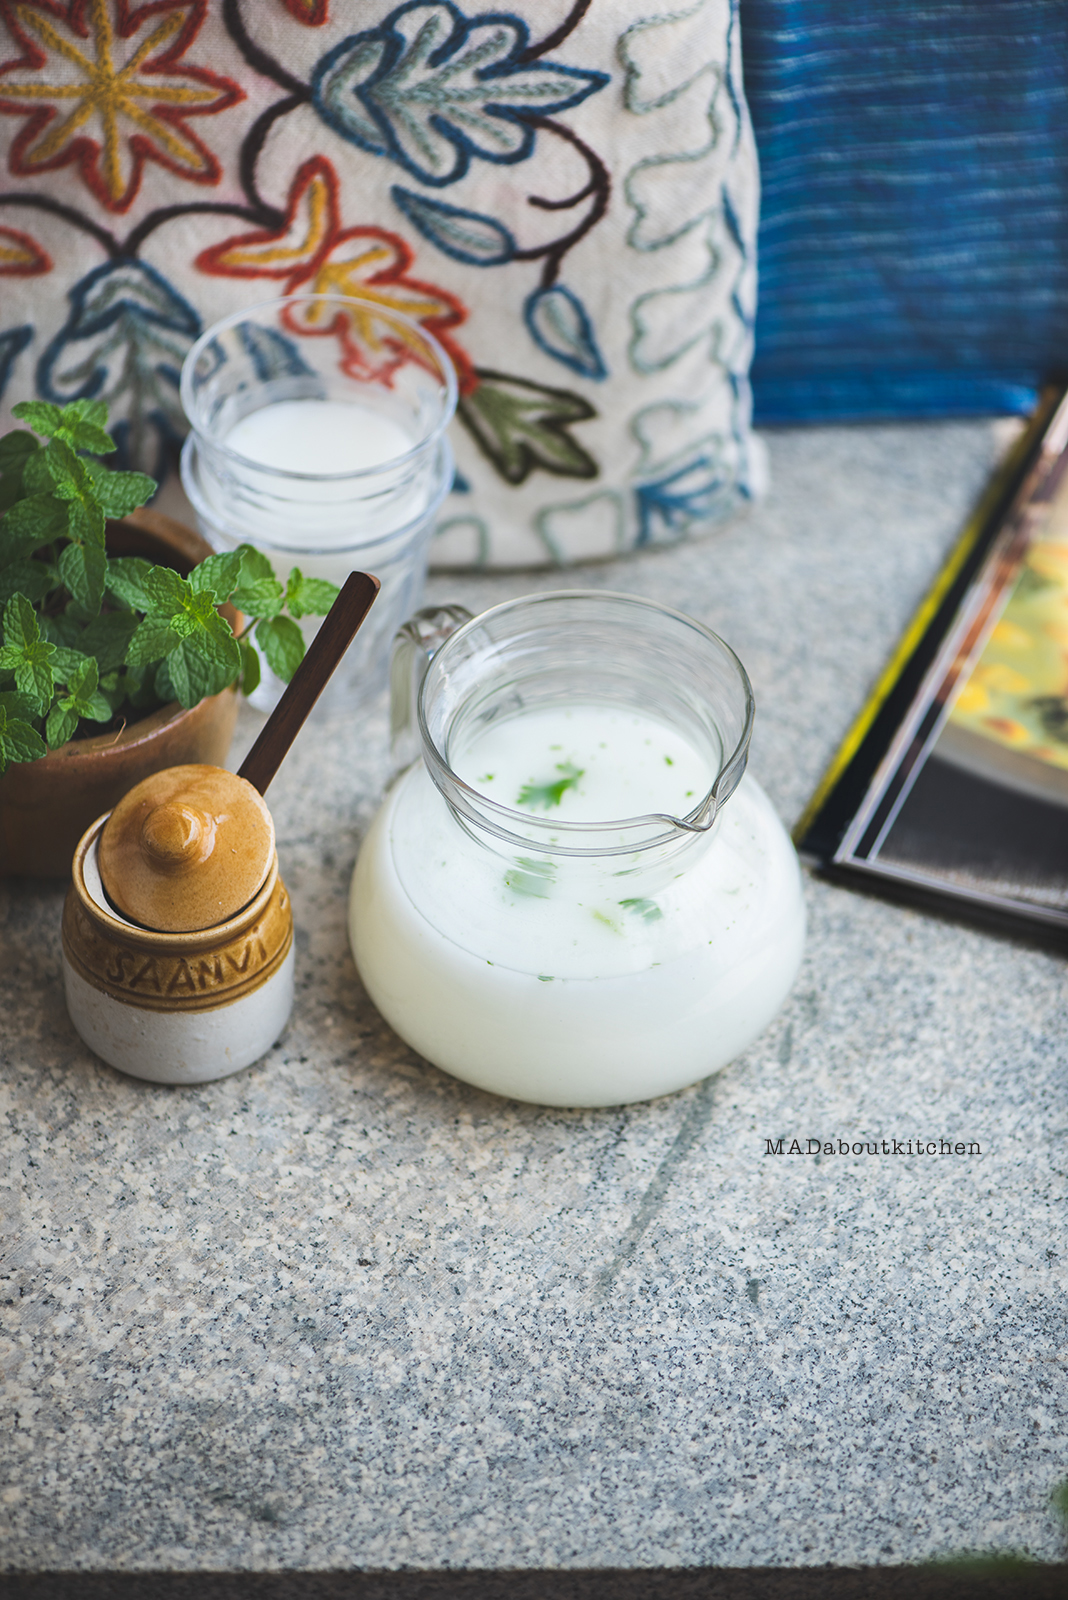 Chaas, is one of the most soothing, cool drink that can be made at home. I use different flavours everyday and hence never can have enough of it. Majjige is also commonly known as Buttermilk in India.